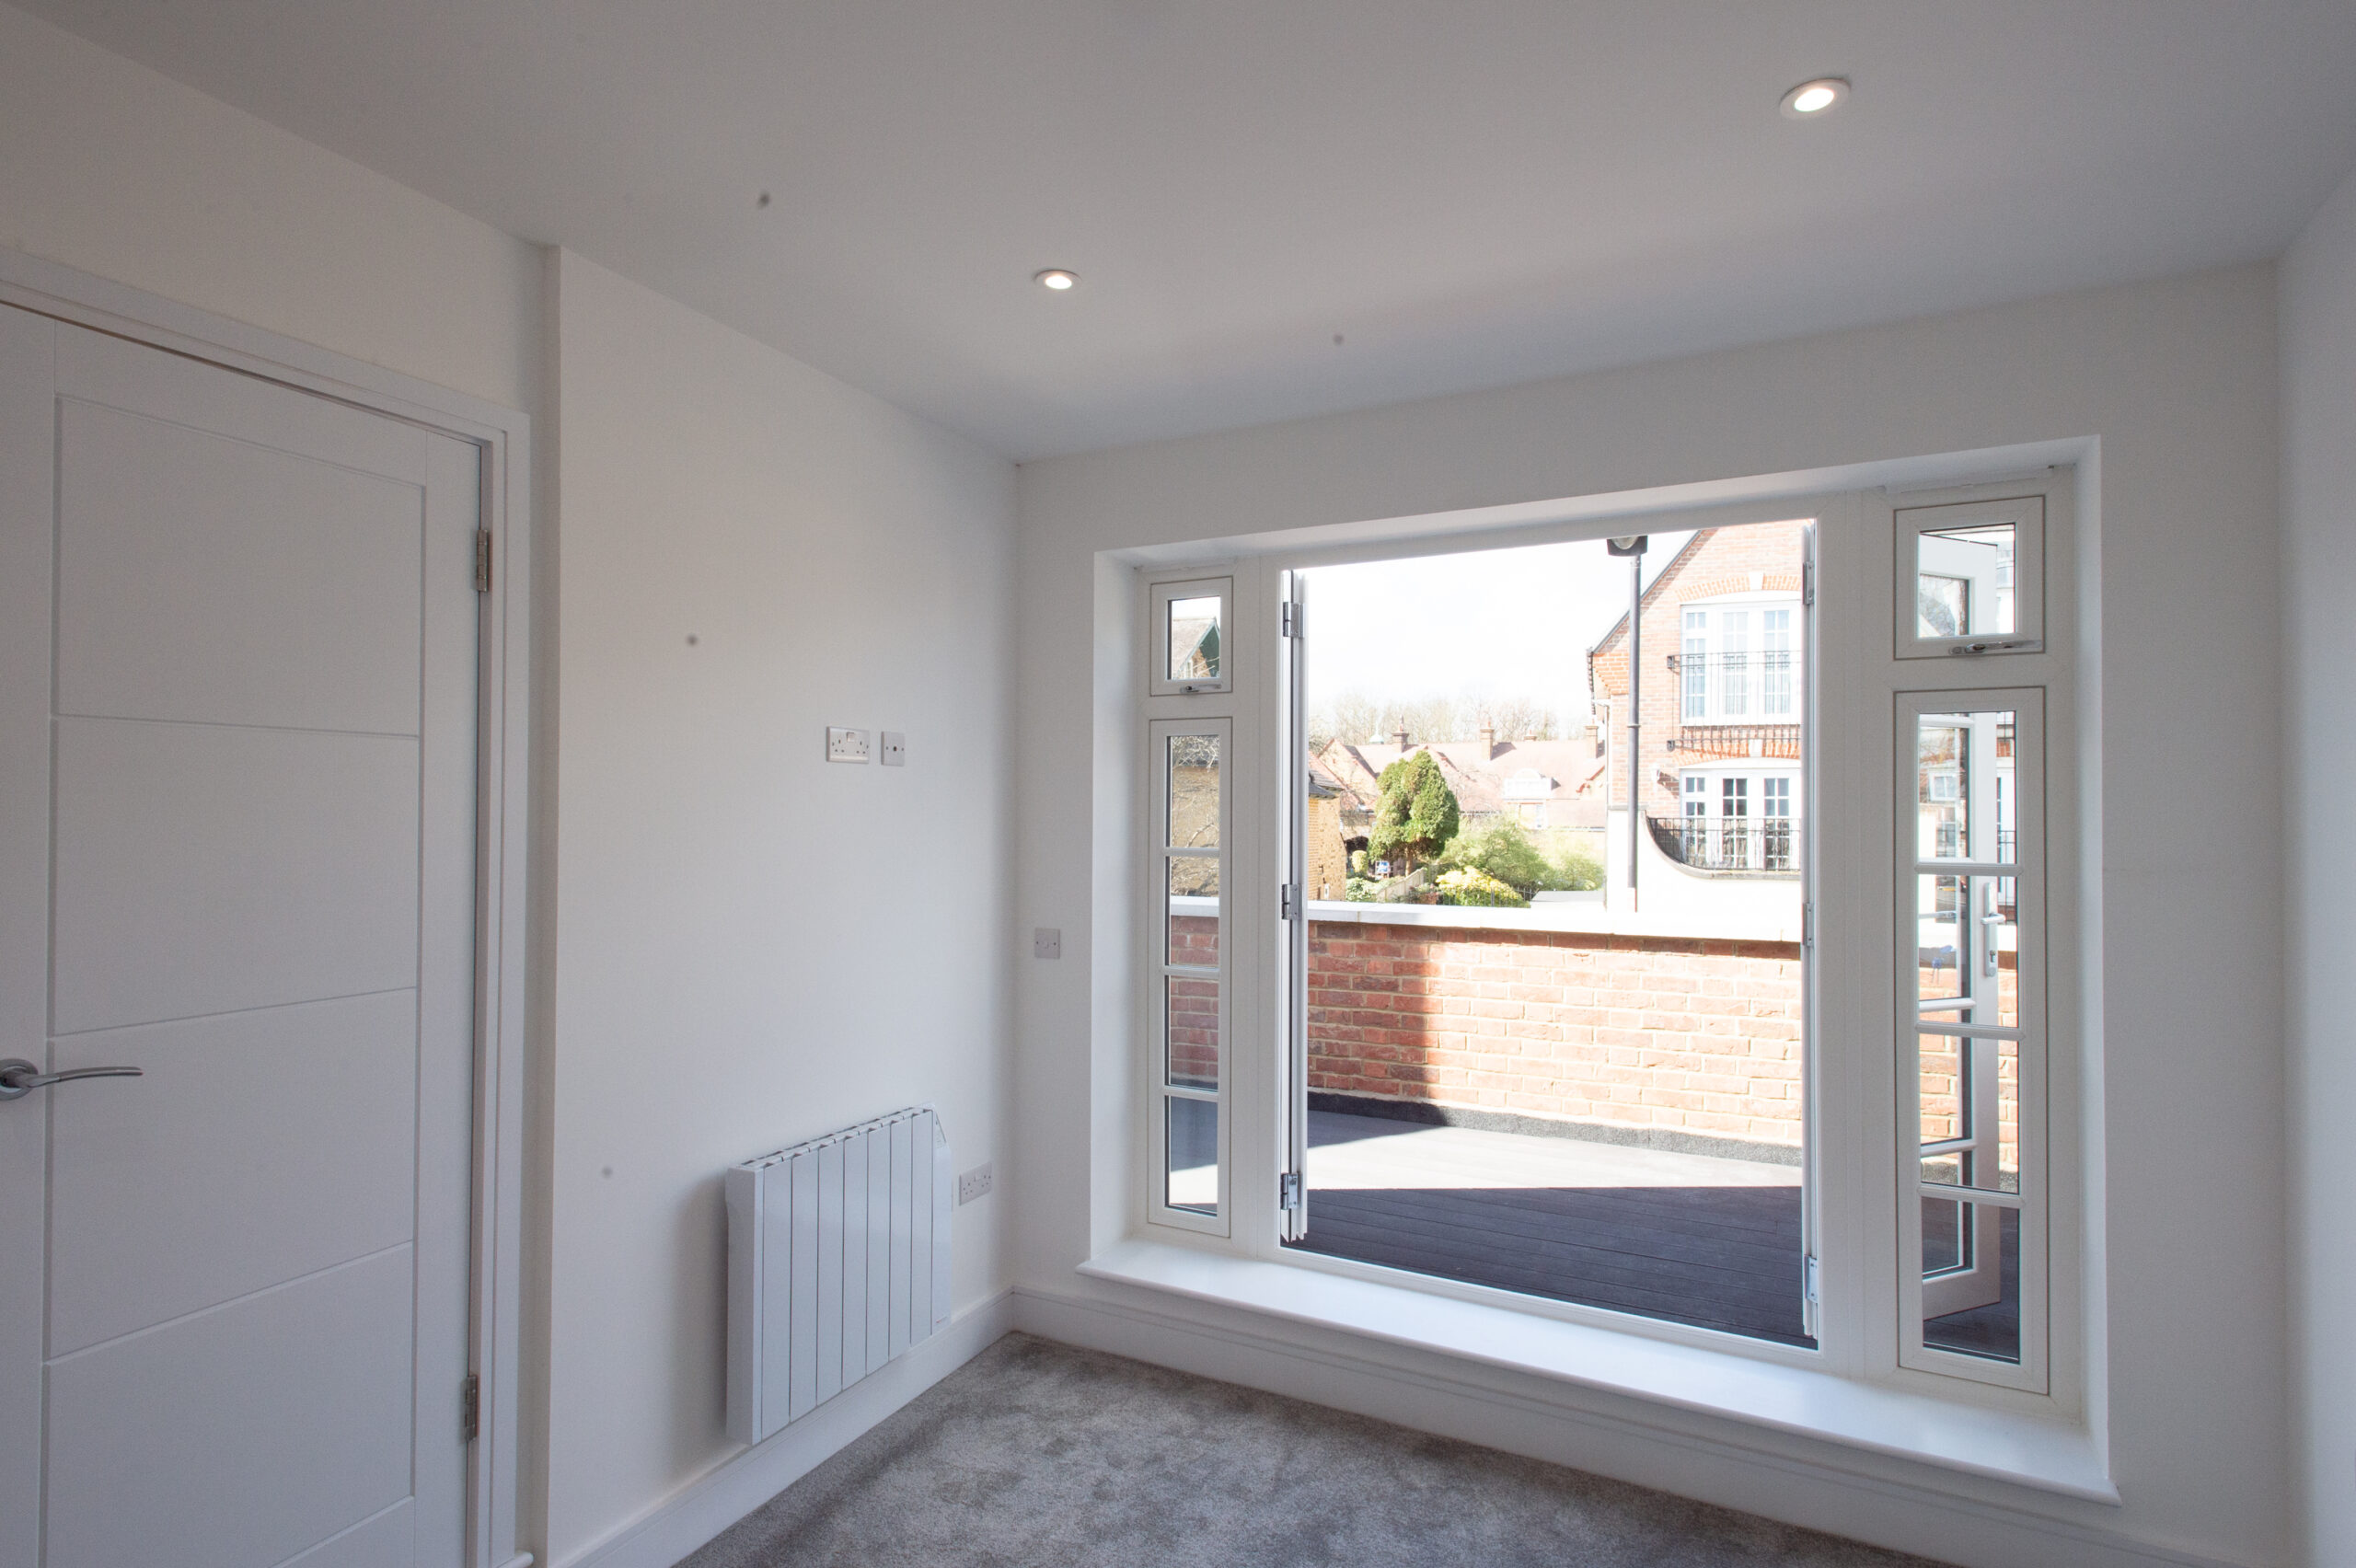 New Build 2 bedroom detached house in one of the best roads in enfield